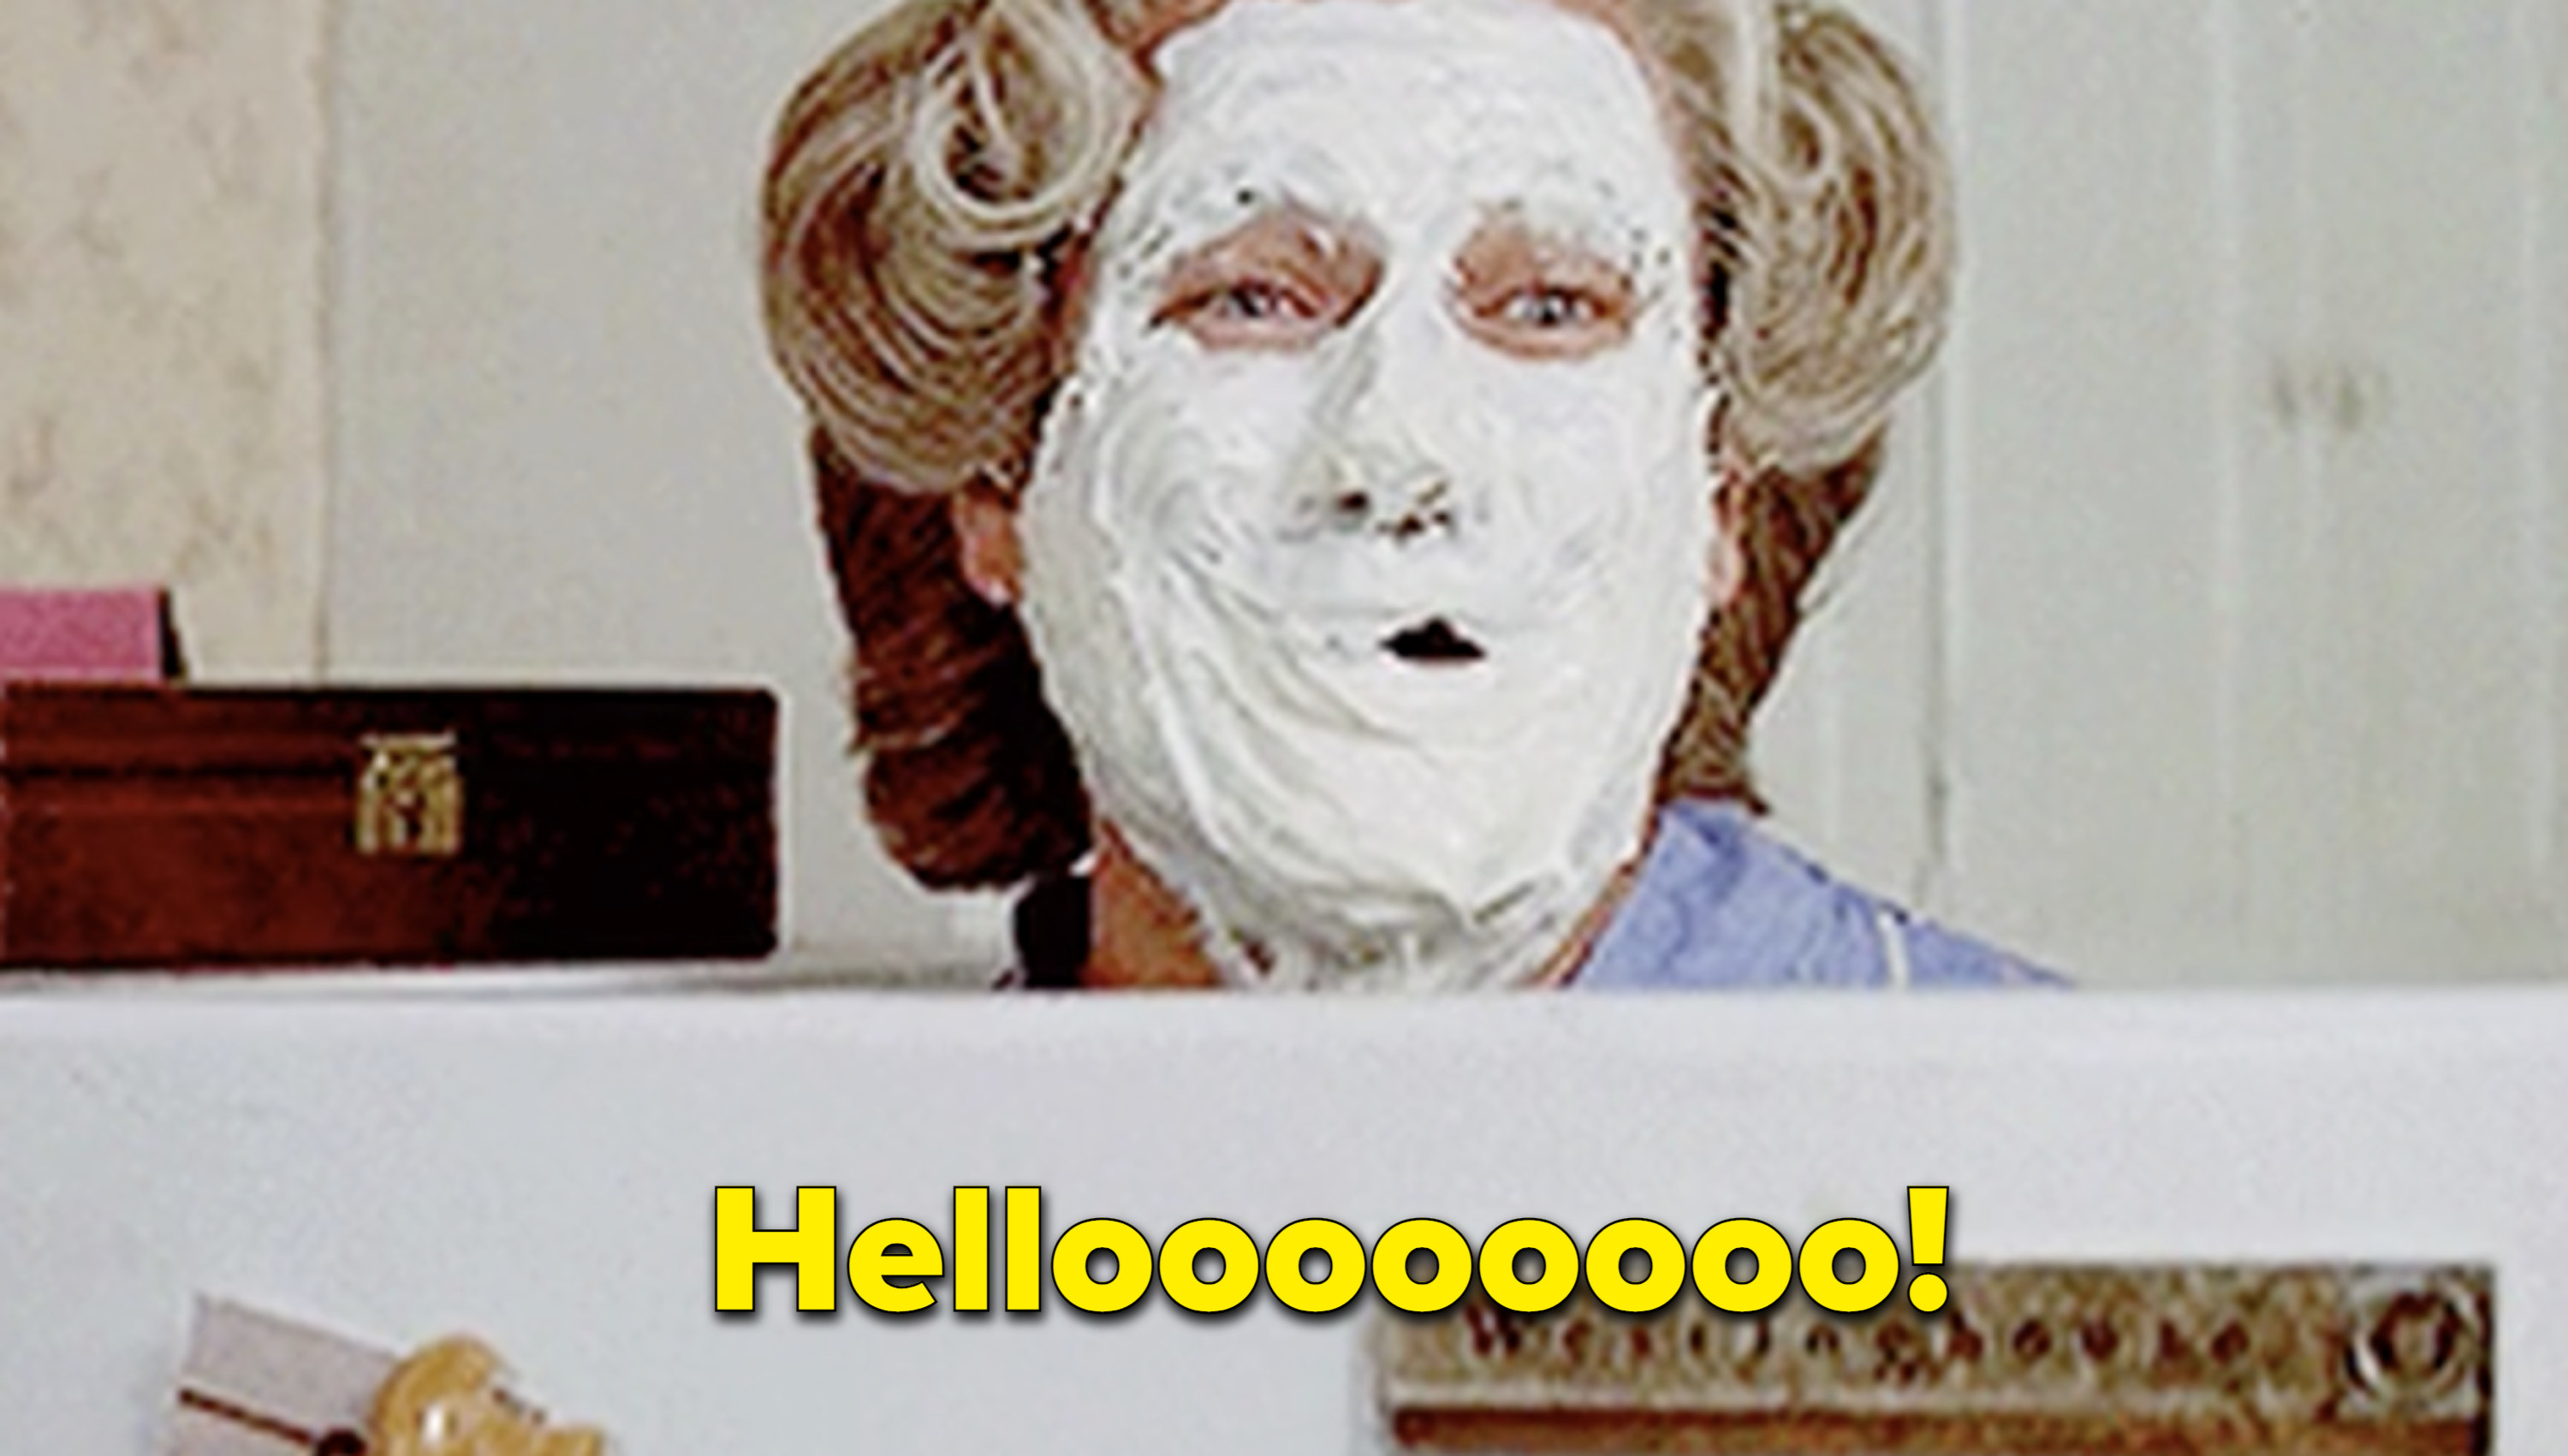 Robin Williams in &quot;Mrs. Doubtfire&quot; saying: &quot;Helloooooooo!&quot; with whipped cream on his face